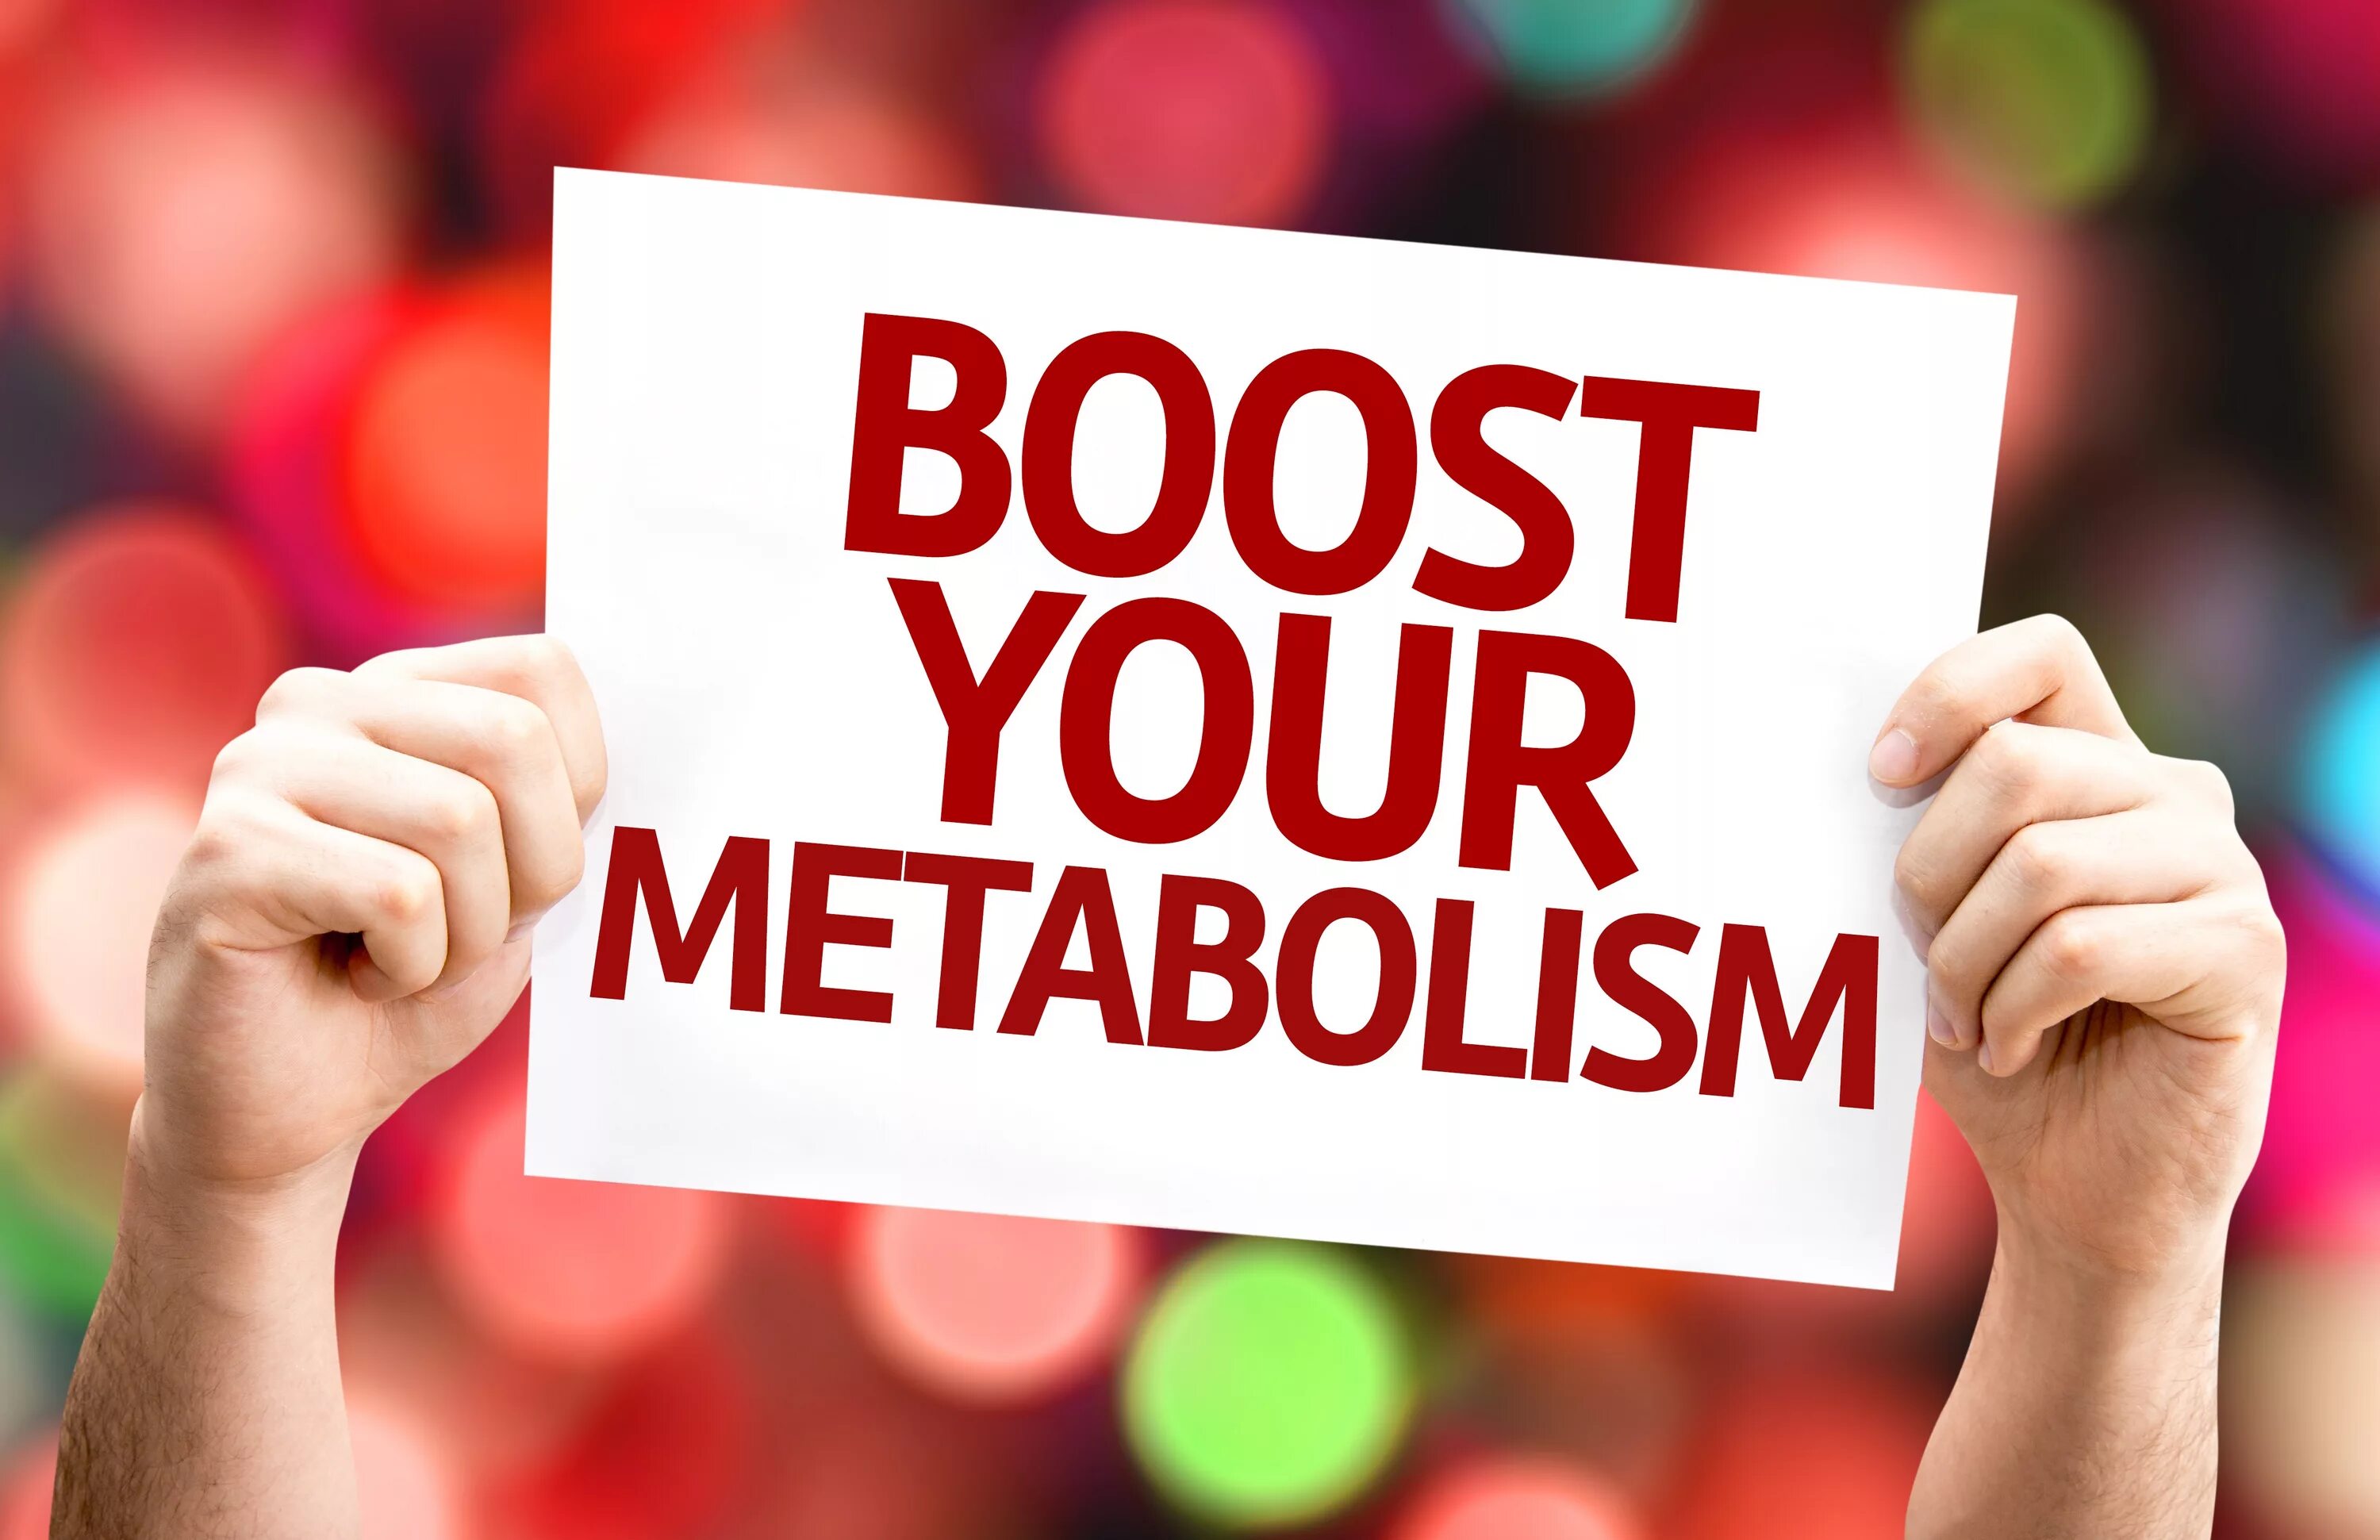 Boost your. How to Speed up your metabolism. Метаболизм HD. Metabolismul. How's your health